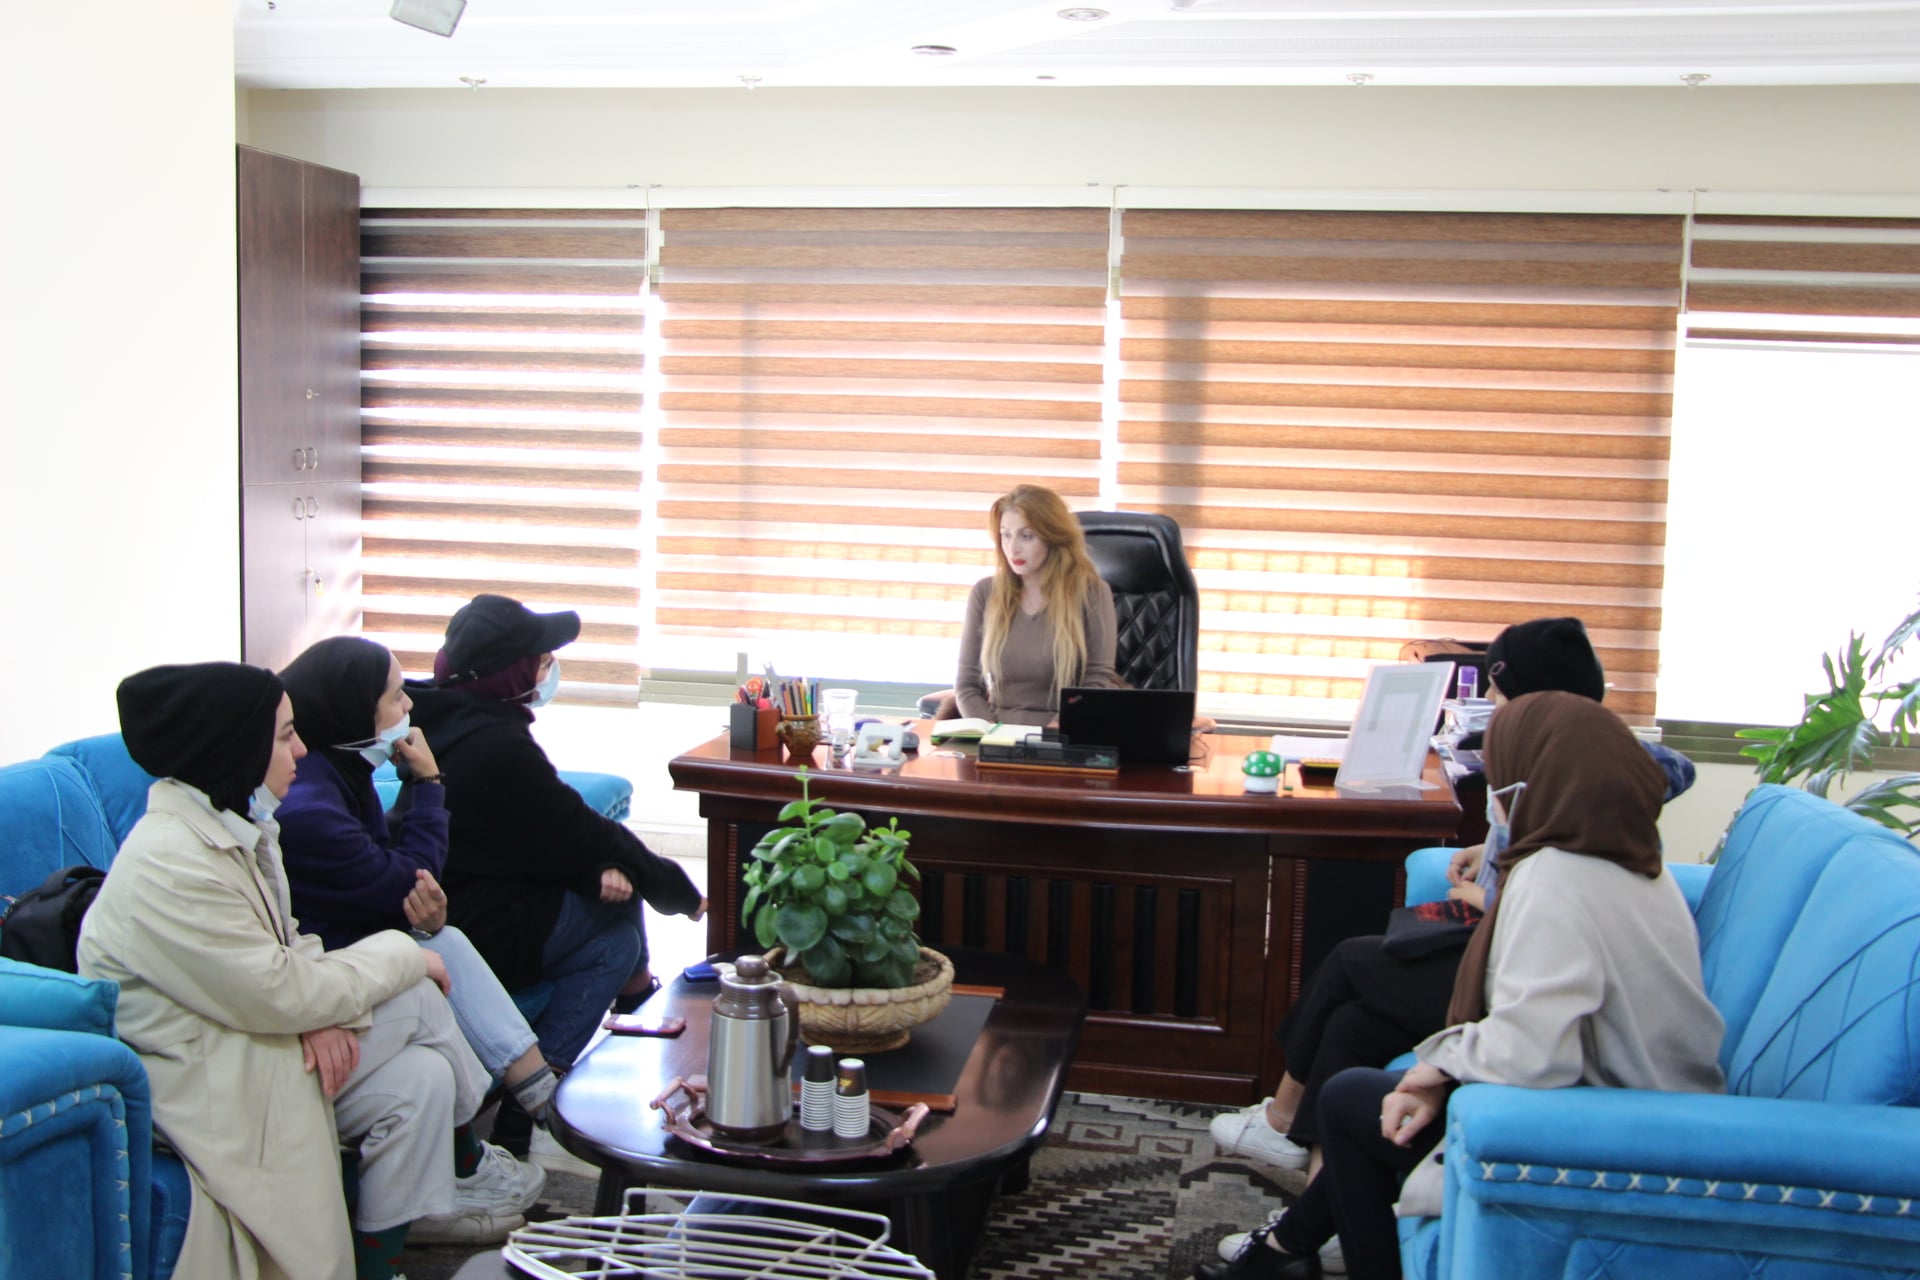  ADWAR meets a group of young women from the Palestinian Center